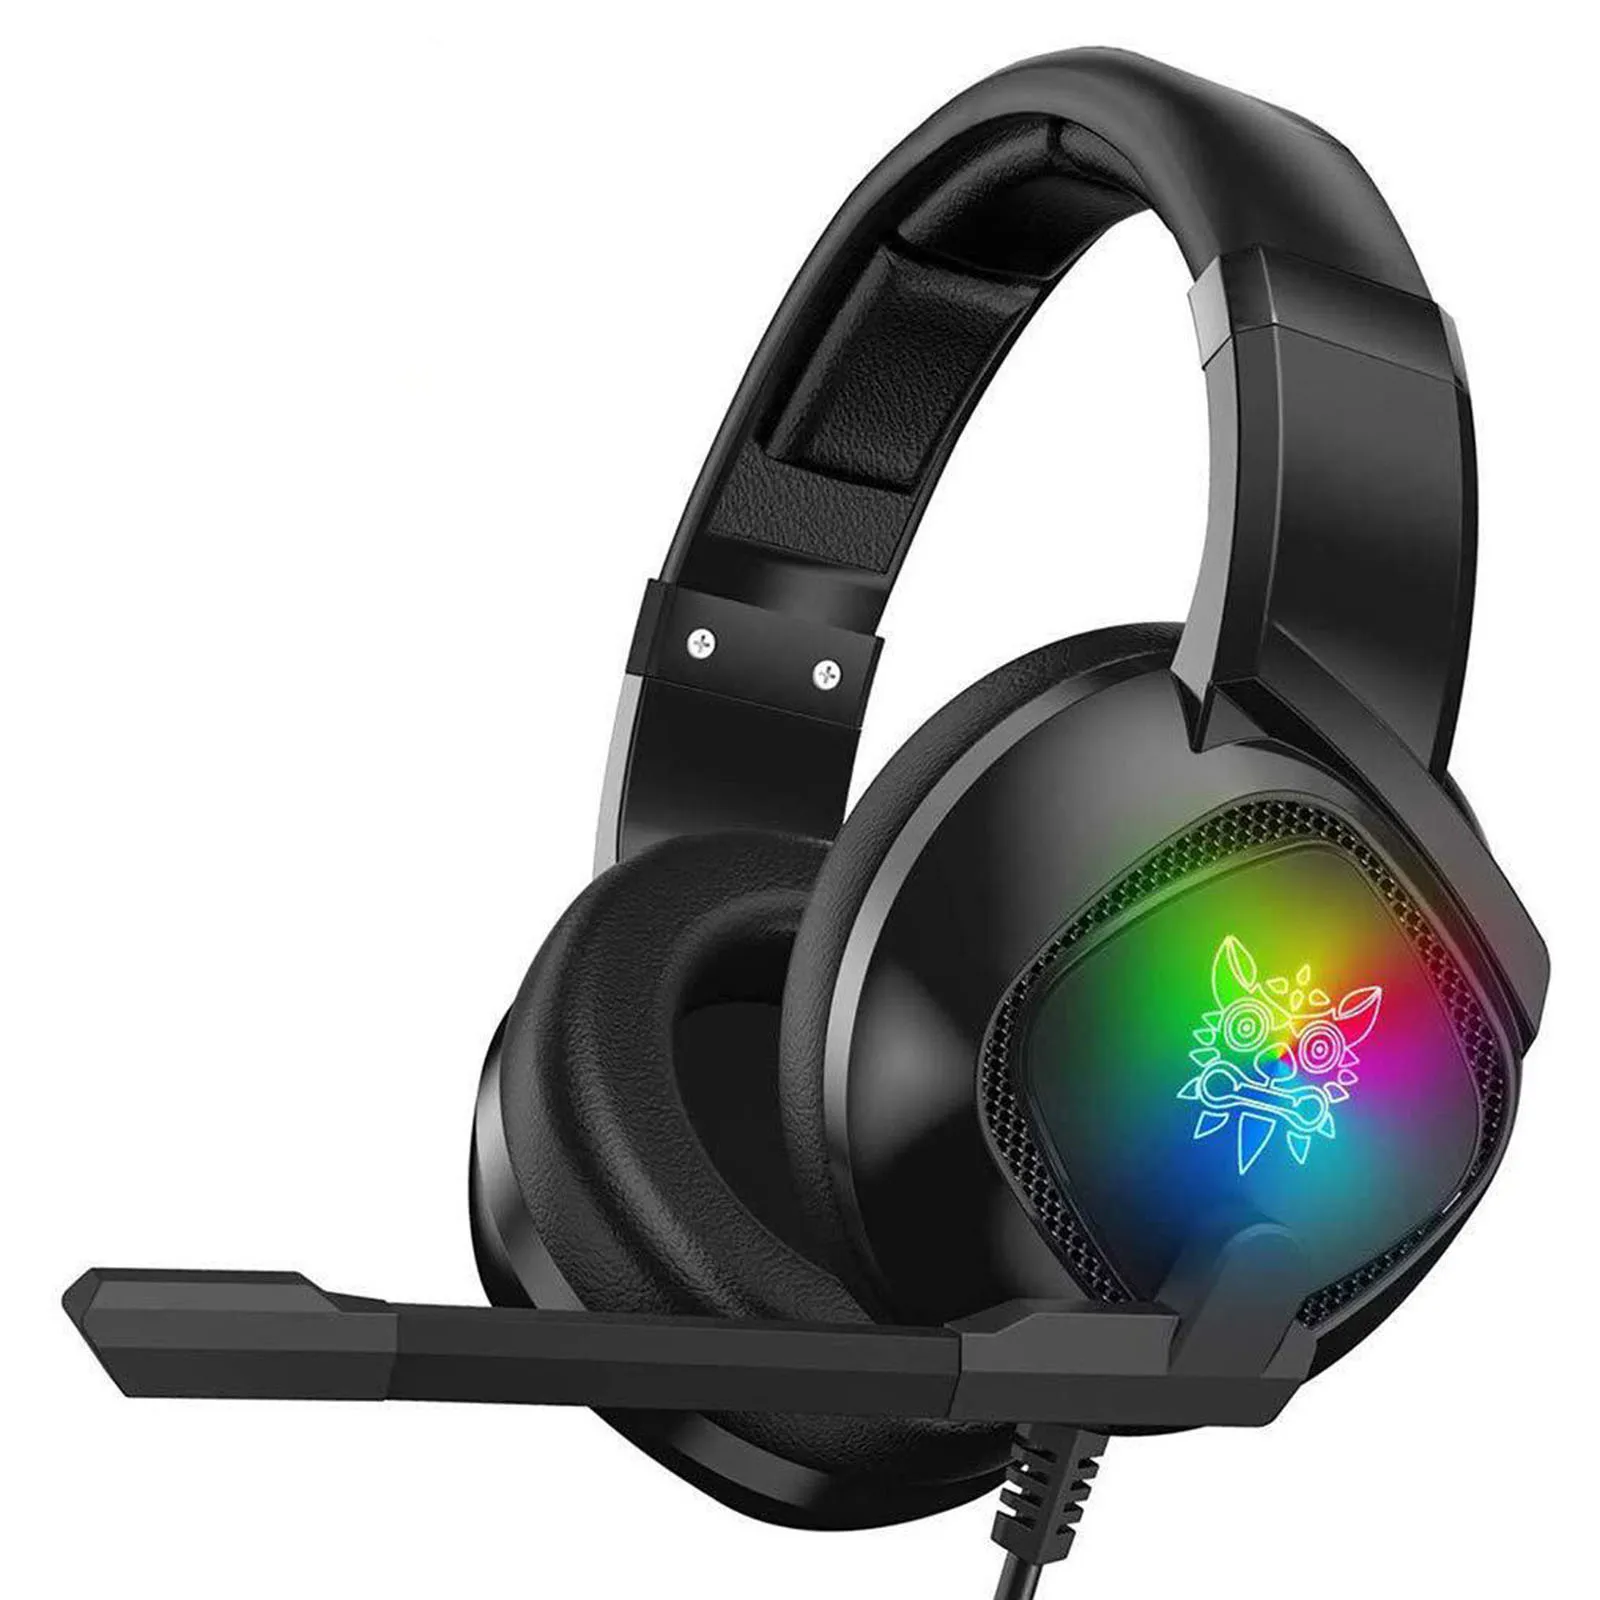 

ONIKUMA K19 Gaming Headset For PS4 Switch PC Laptop Over Ear Headphone With Noise Cancelling Mic RGB Light USB Plug/3.5mm Plug